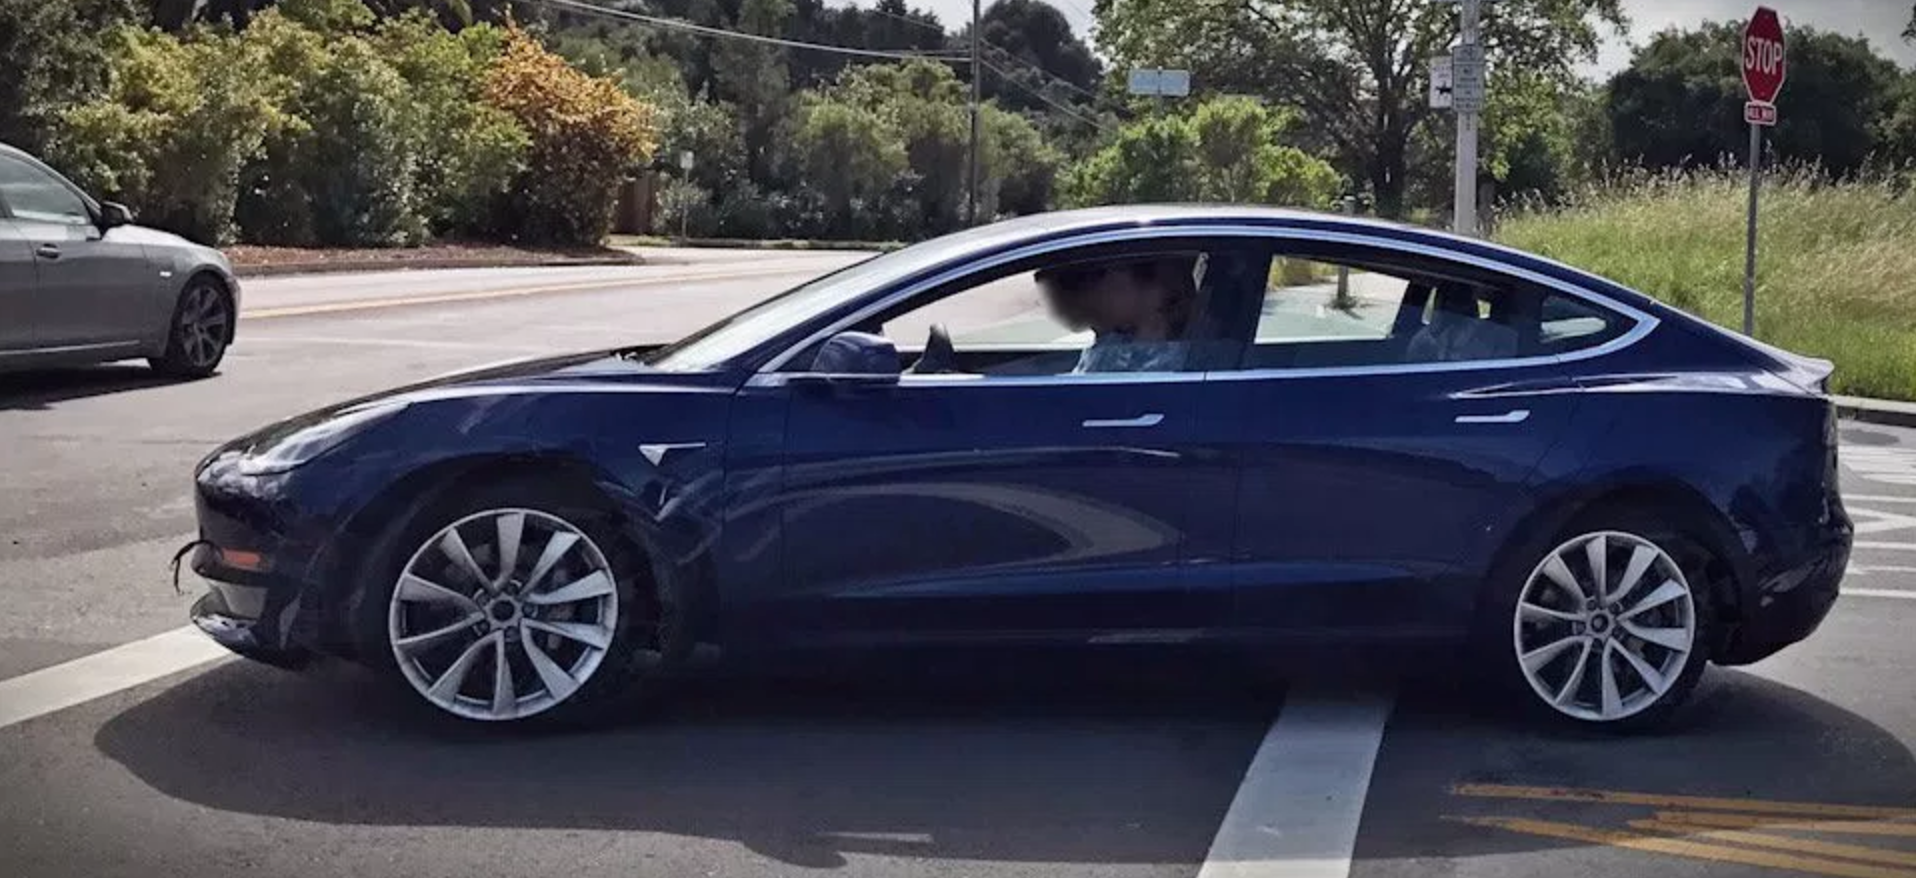 tesla model 3 pictures blue release candidate